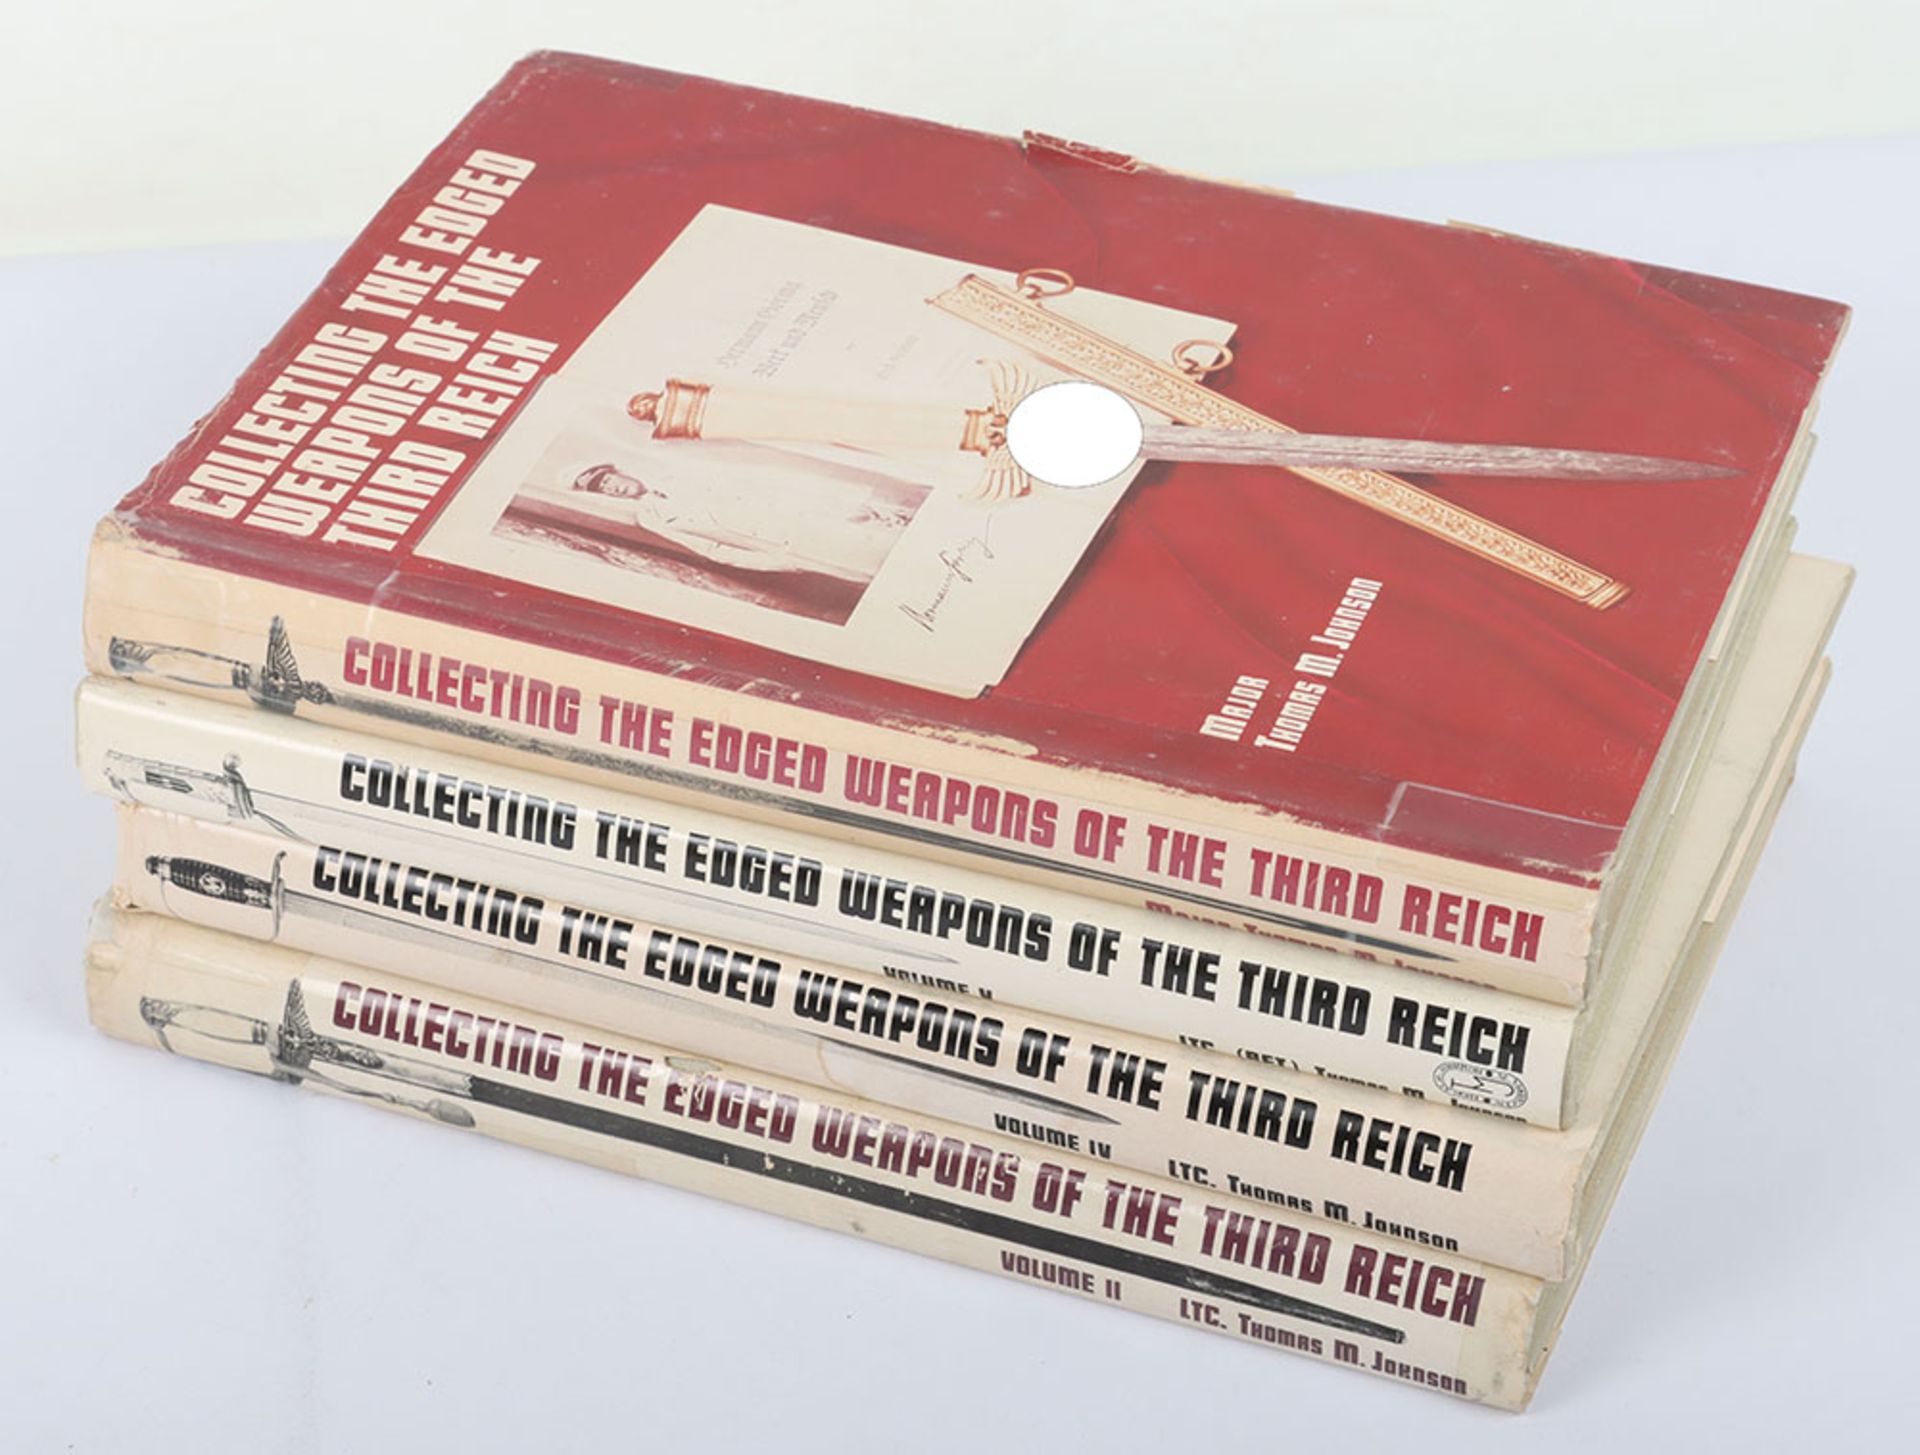 Collecting The Edged Weapons of the Third Reich Books